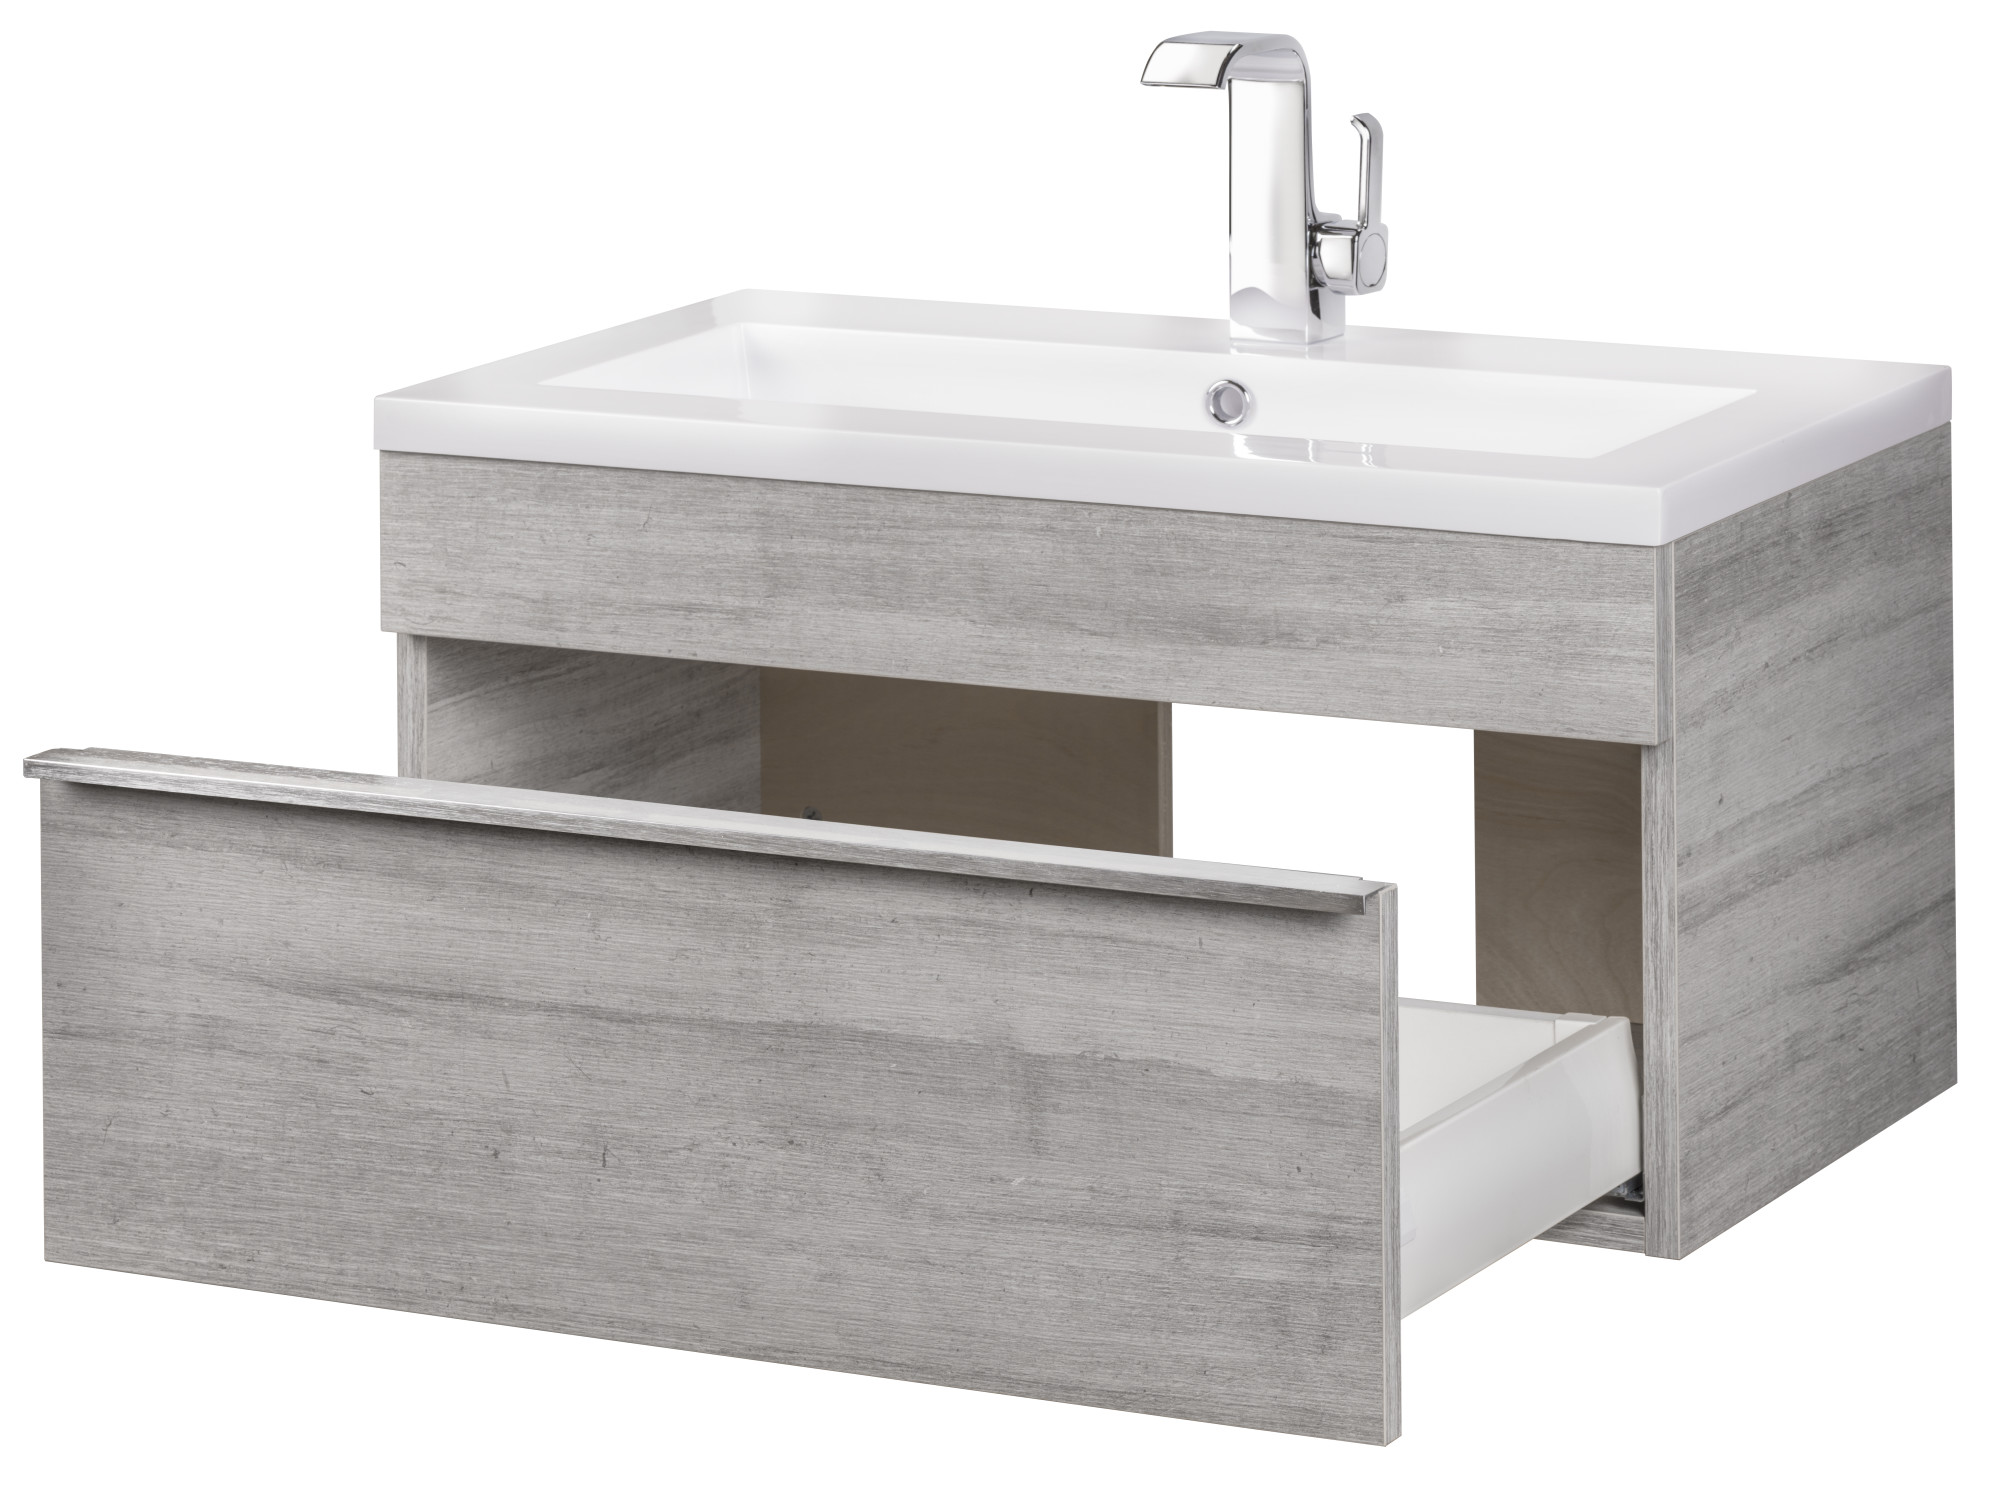 cutler kitchen and bath trough collection